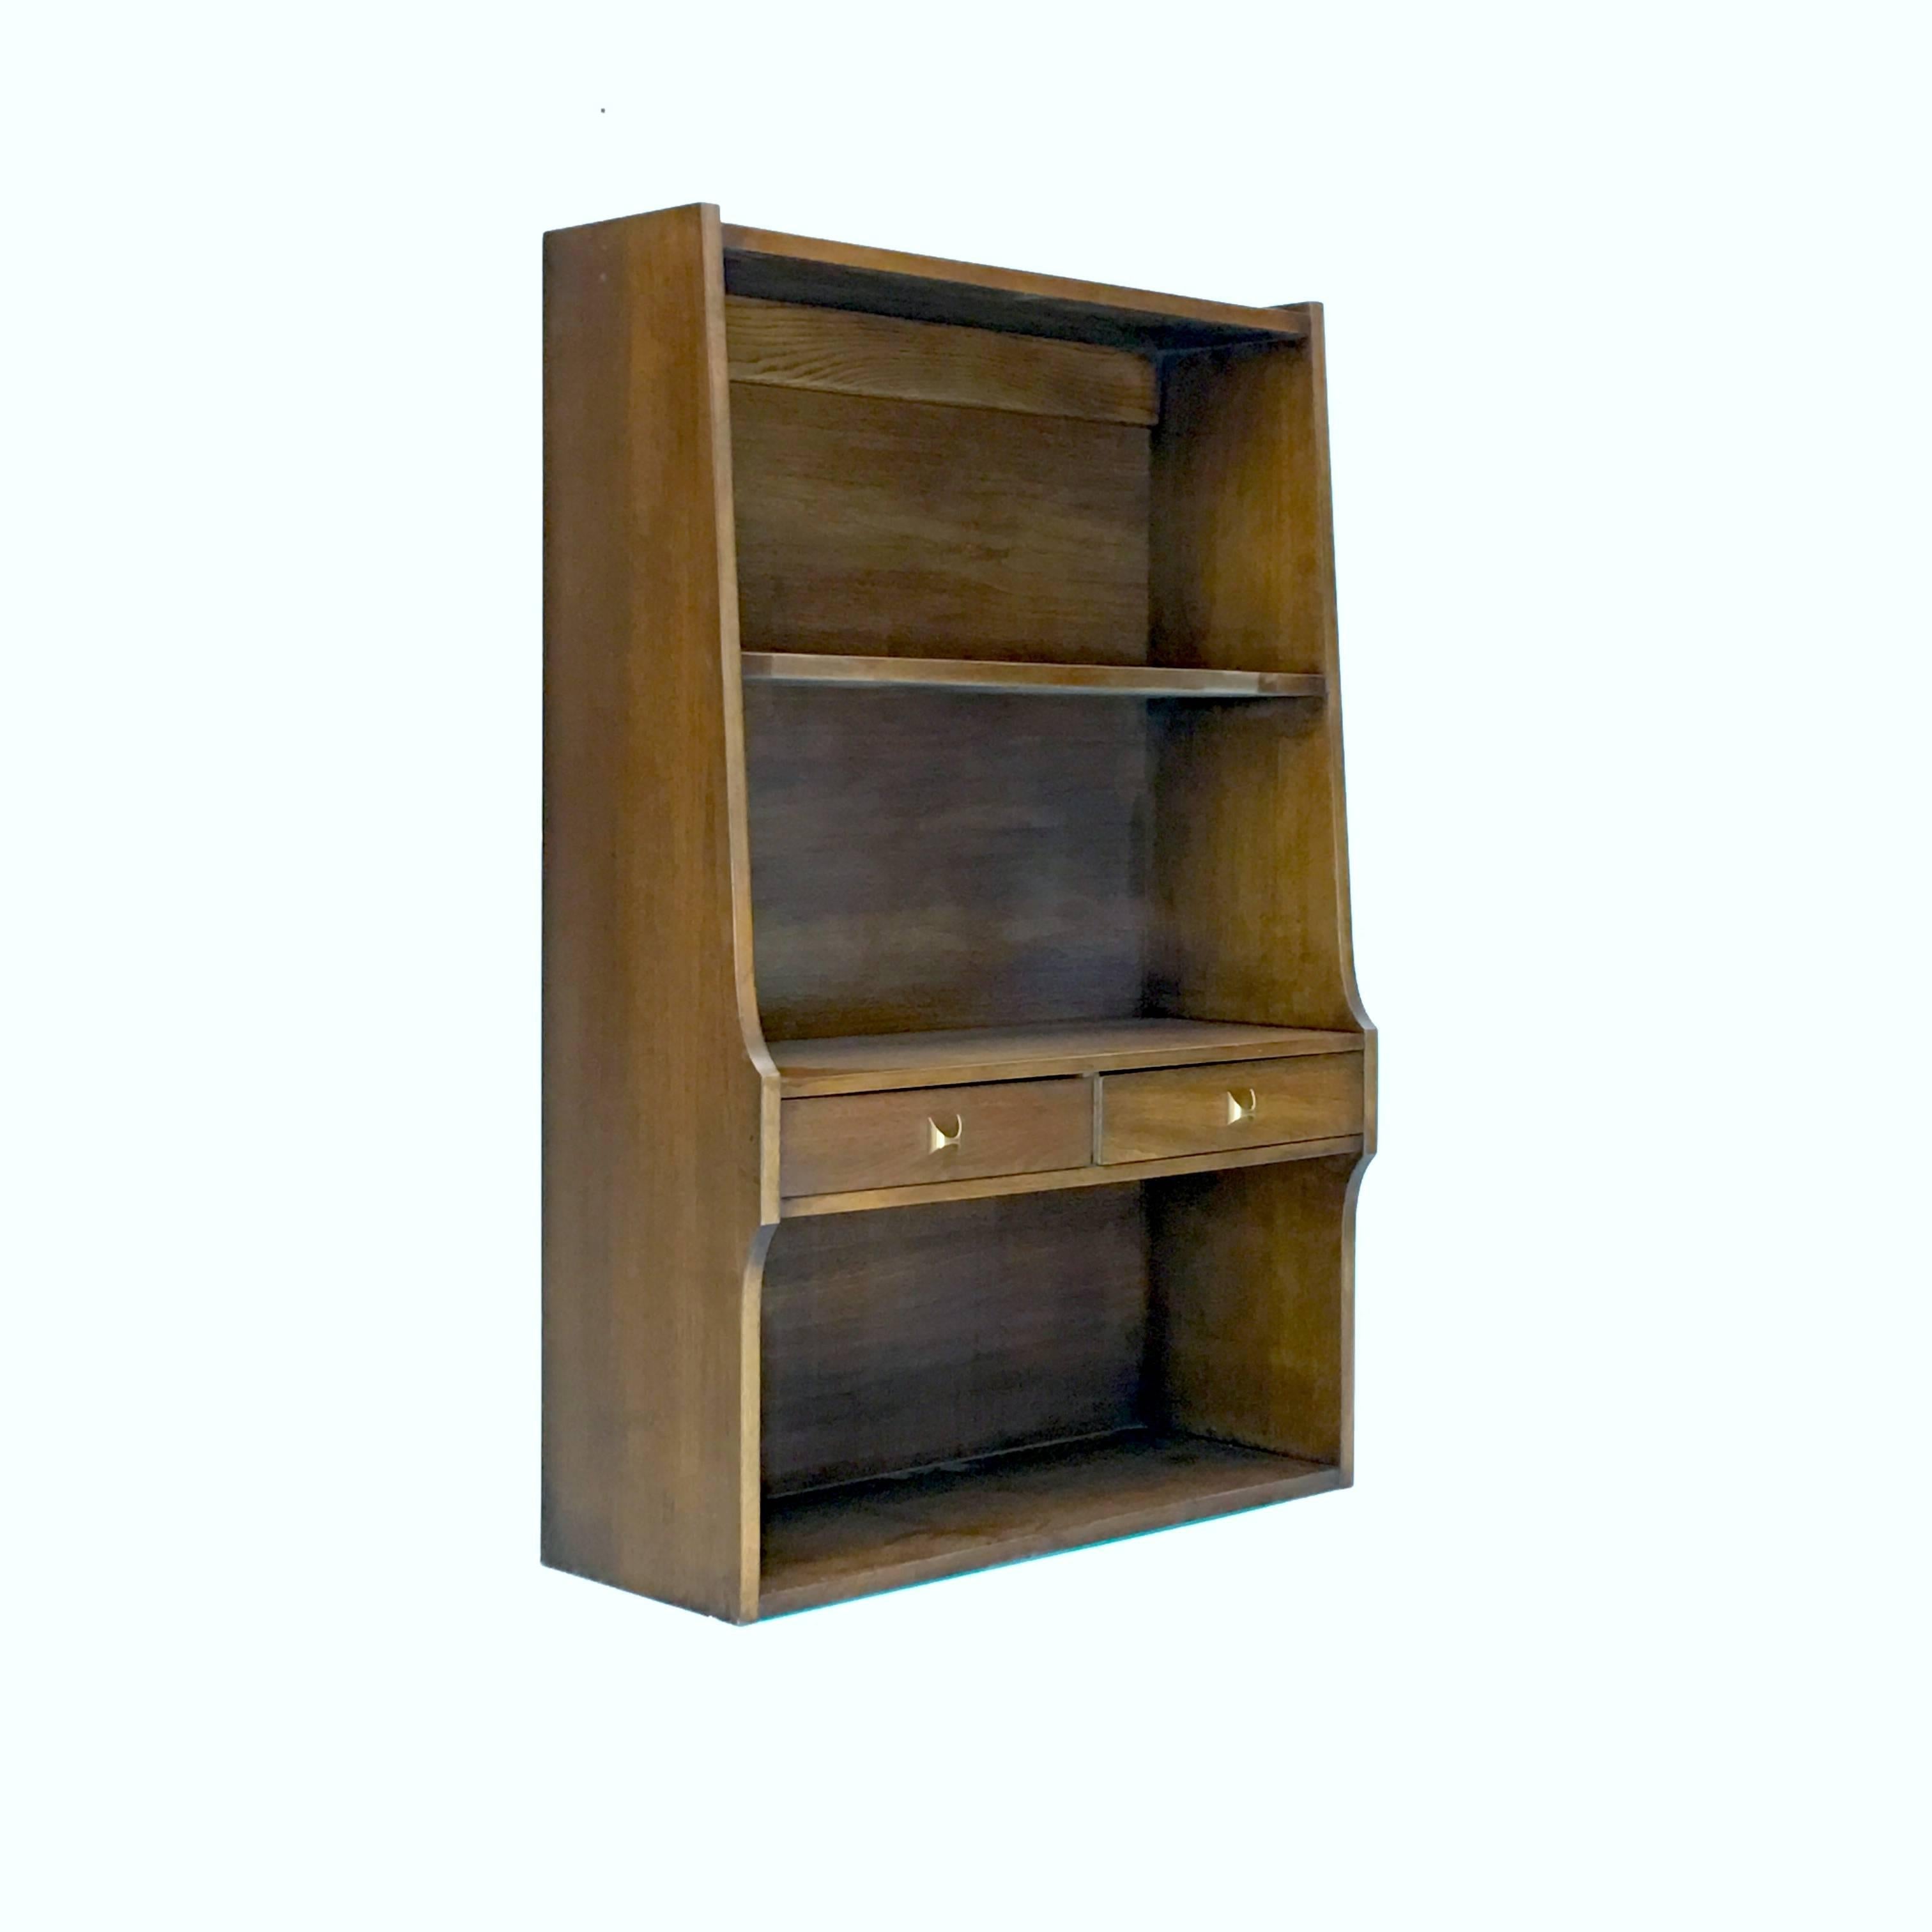 A hard to find cabinet and shelf unit from the Broyhill Brasilia Premier line which was inspired by Oscar Niemeyer's Mid-Century architectural marvels in Brazil. 

Listed in the original Brasilia catalog under occasional furniture. This is a